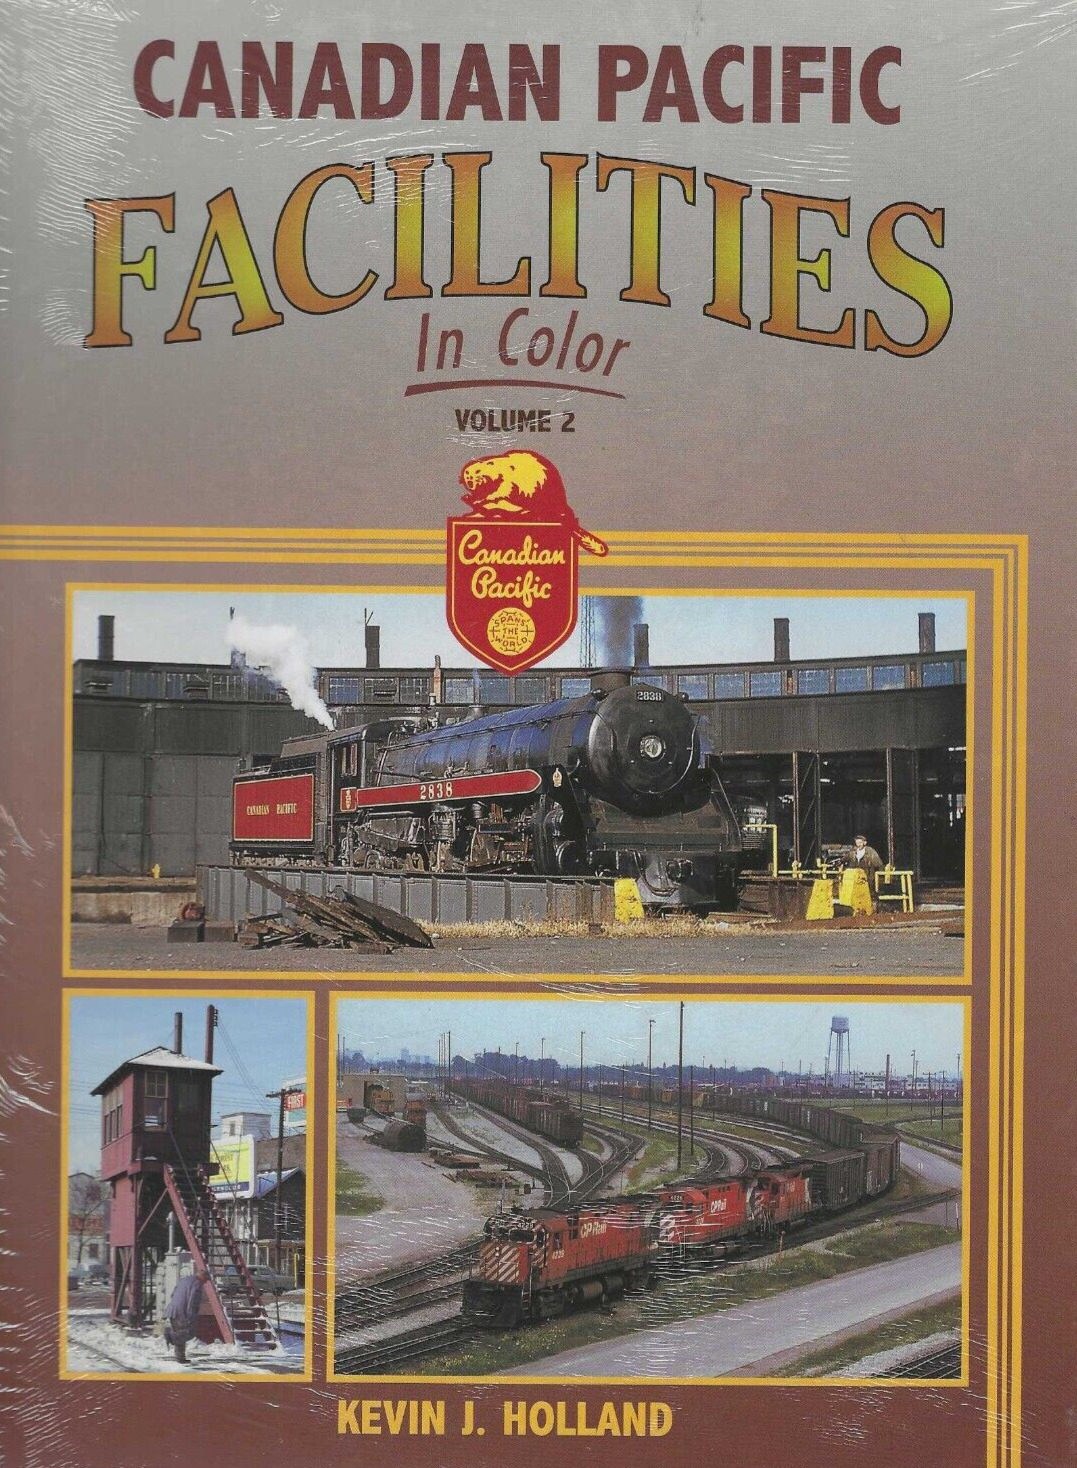 CANADIAN PACIFIC FACILITIES, Vol. 2 - (BRAND NEW BOOK)